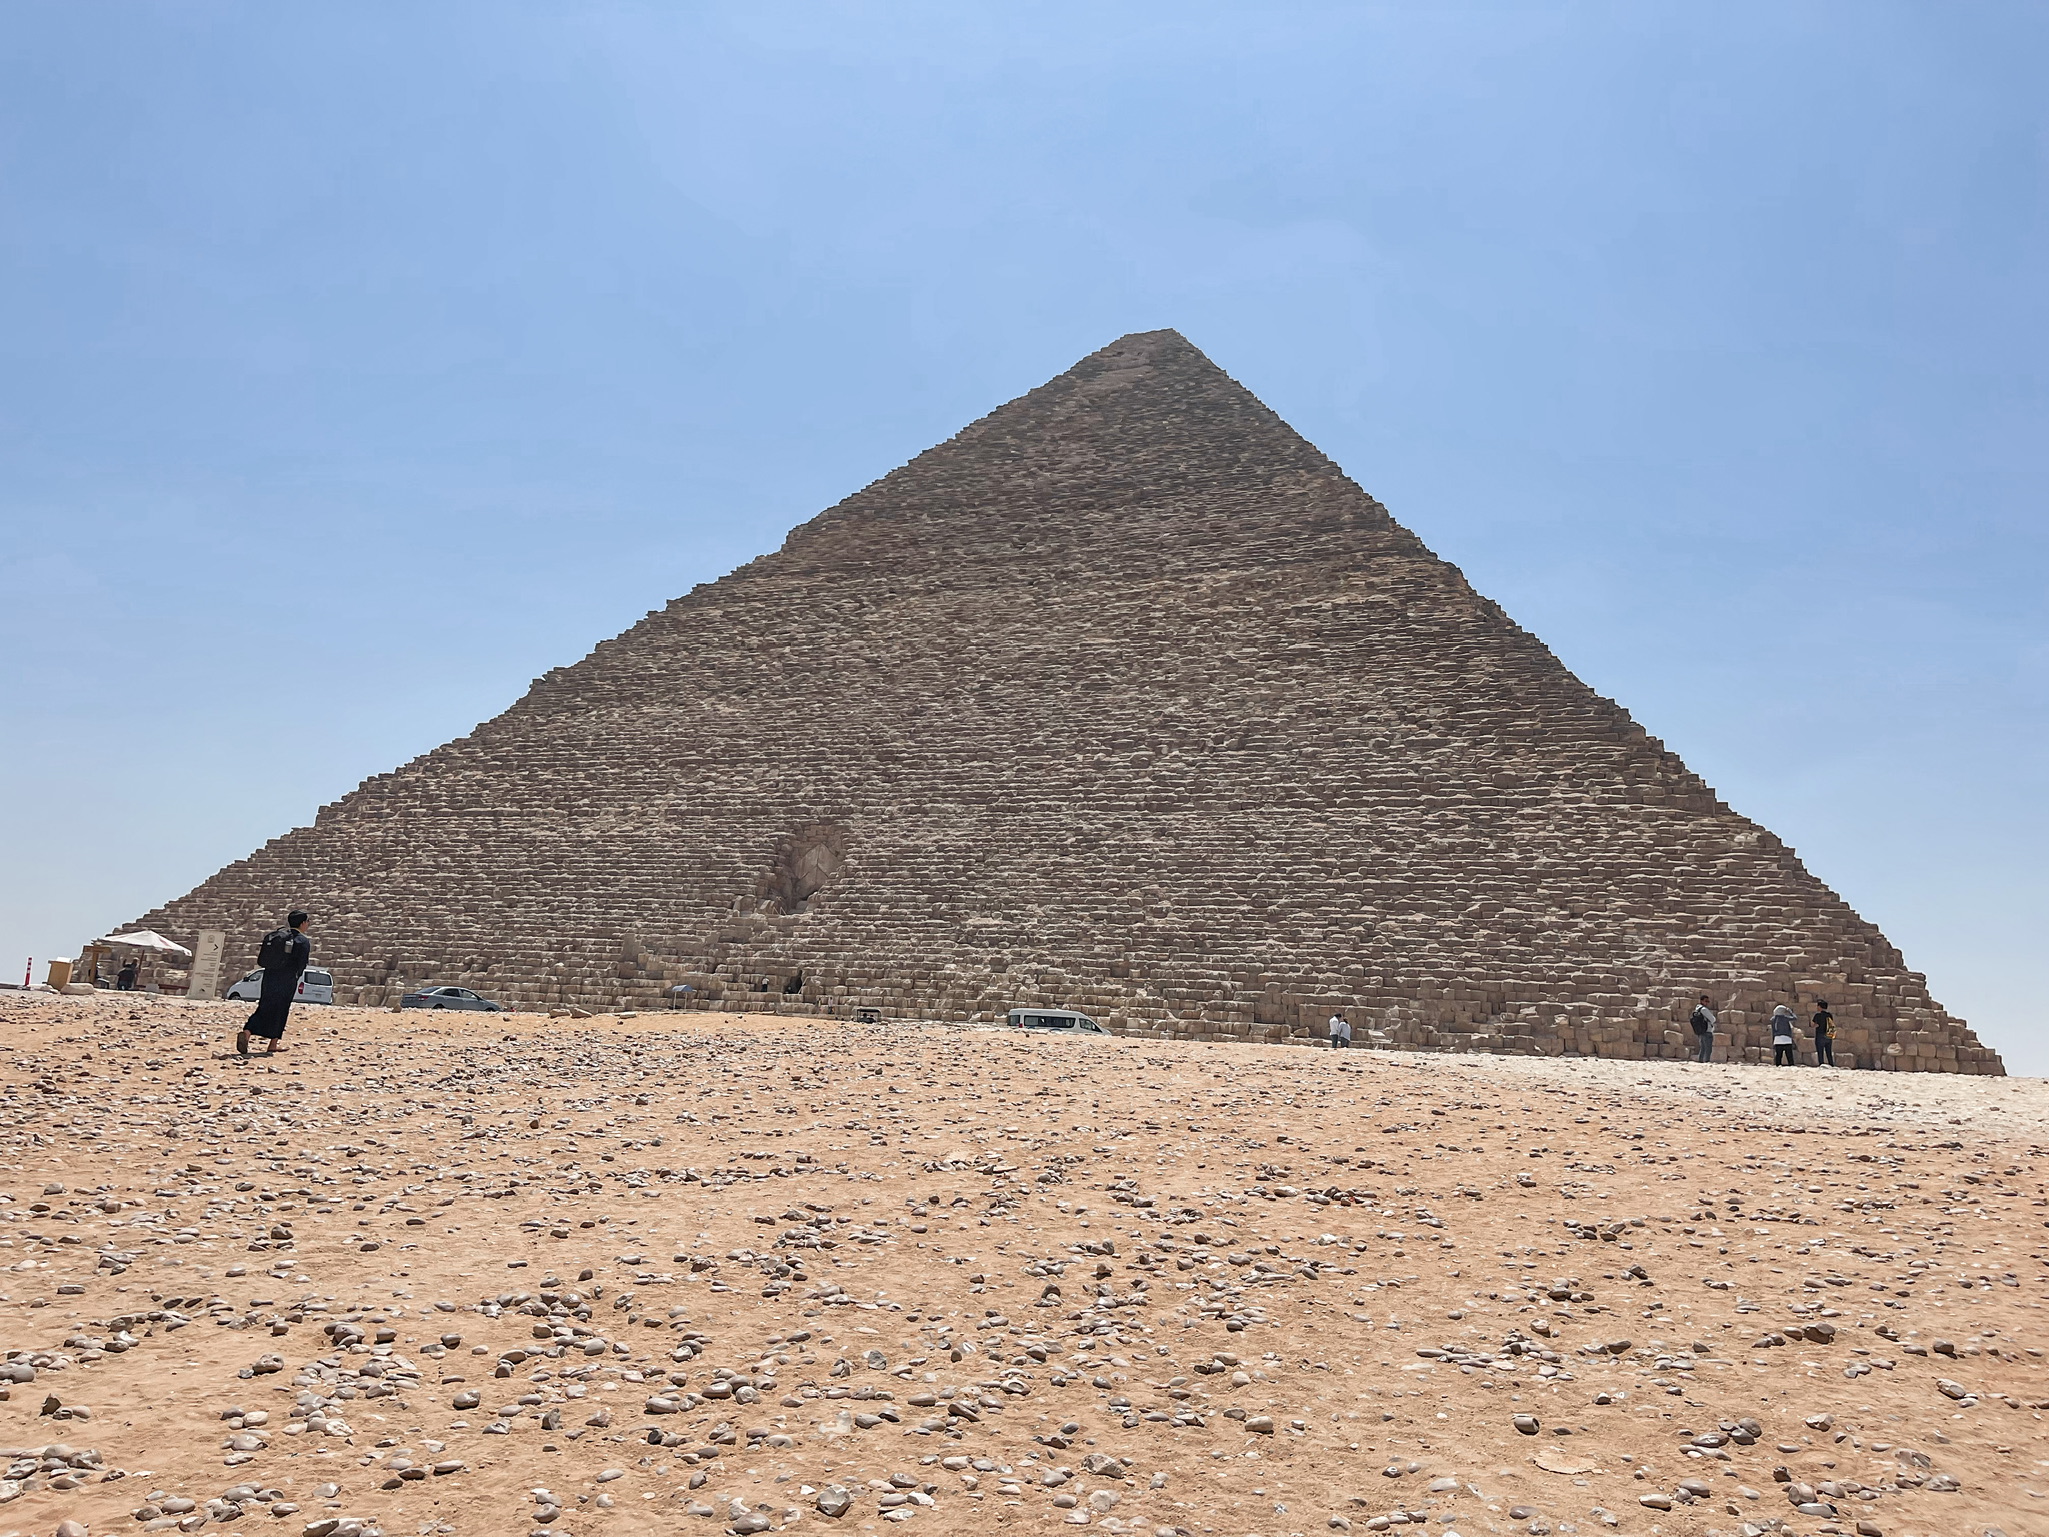 planning a trip to the middle east, where to go in the middle east, how to plan a trip to the middle east, The Great Pyramids of Giza, Egypt, Cairo Egypt, erin busbee, busbee style, busbee family travels, cairo trip, great pyramids of giza trip